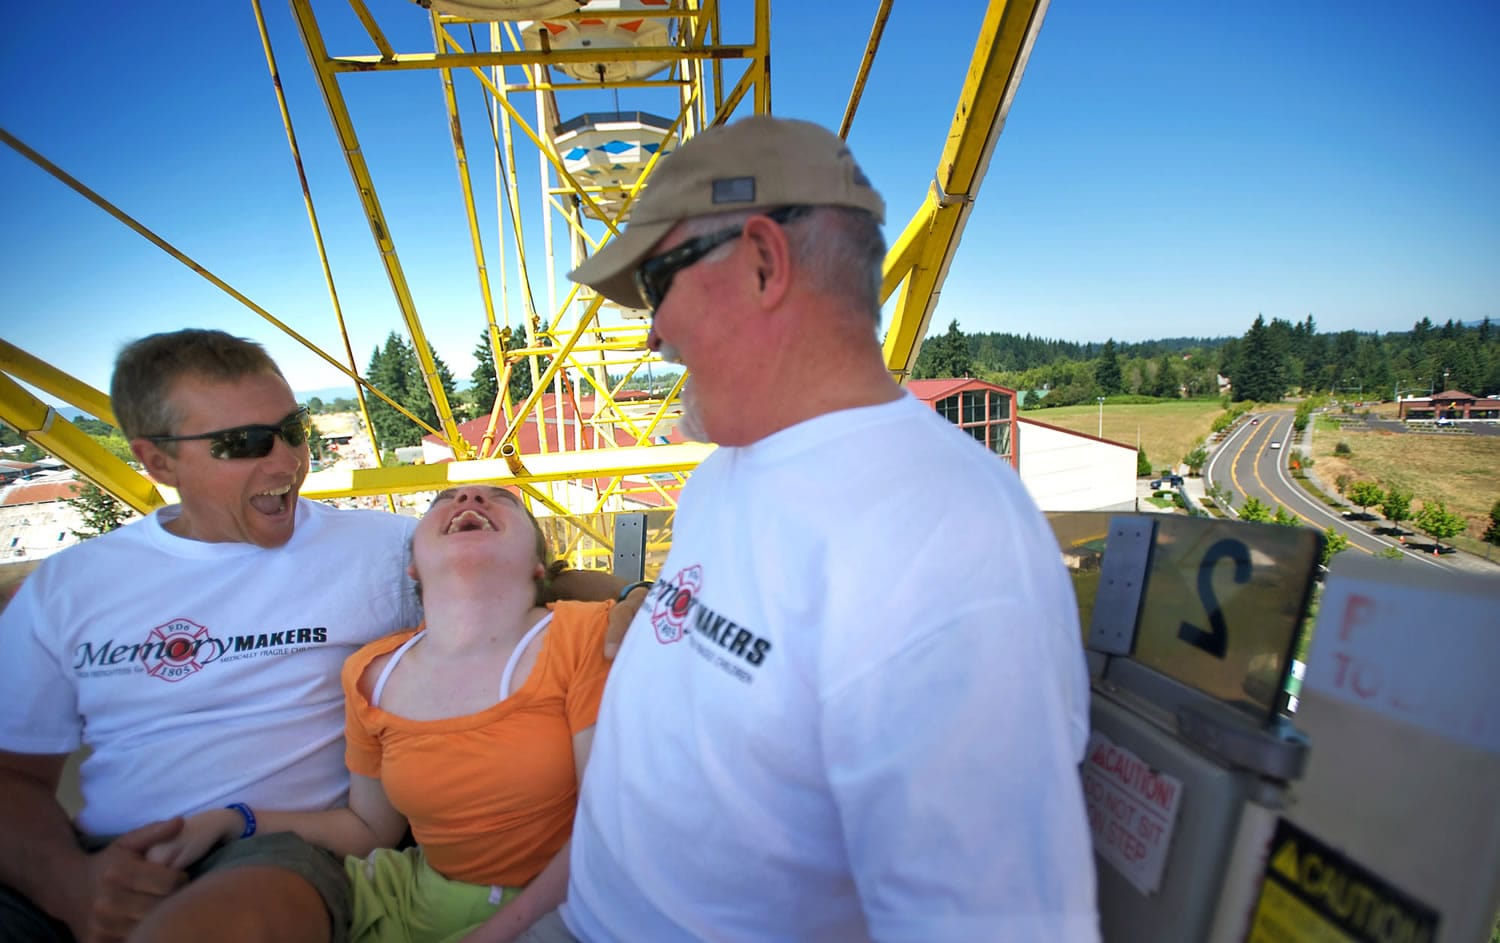 Melissa Macy, 18, of Portland, rides the Ferris wheel on Tuesday with firefighter Jeff Van Laeken, left, and retired firefighter Roy Alvstad.